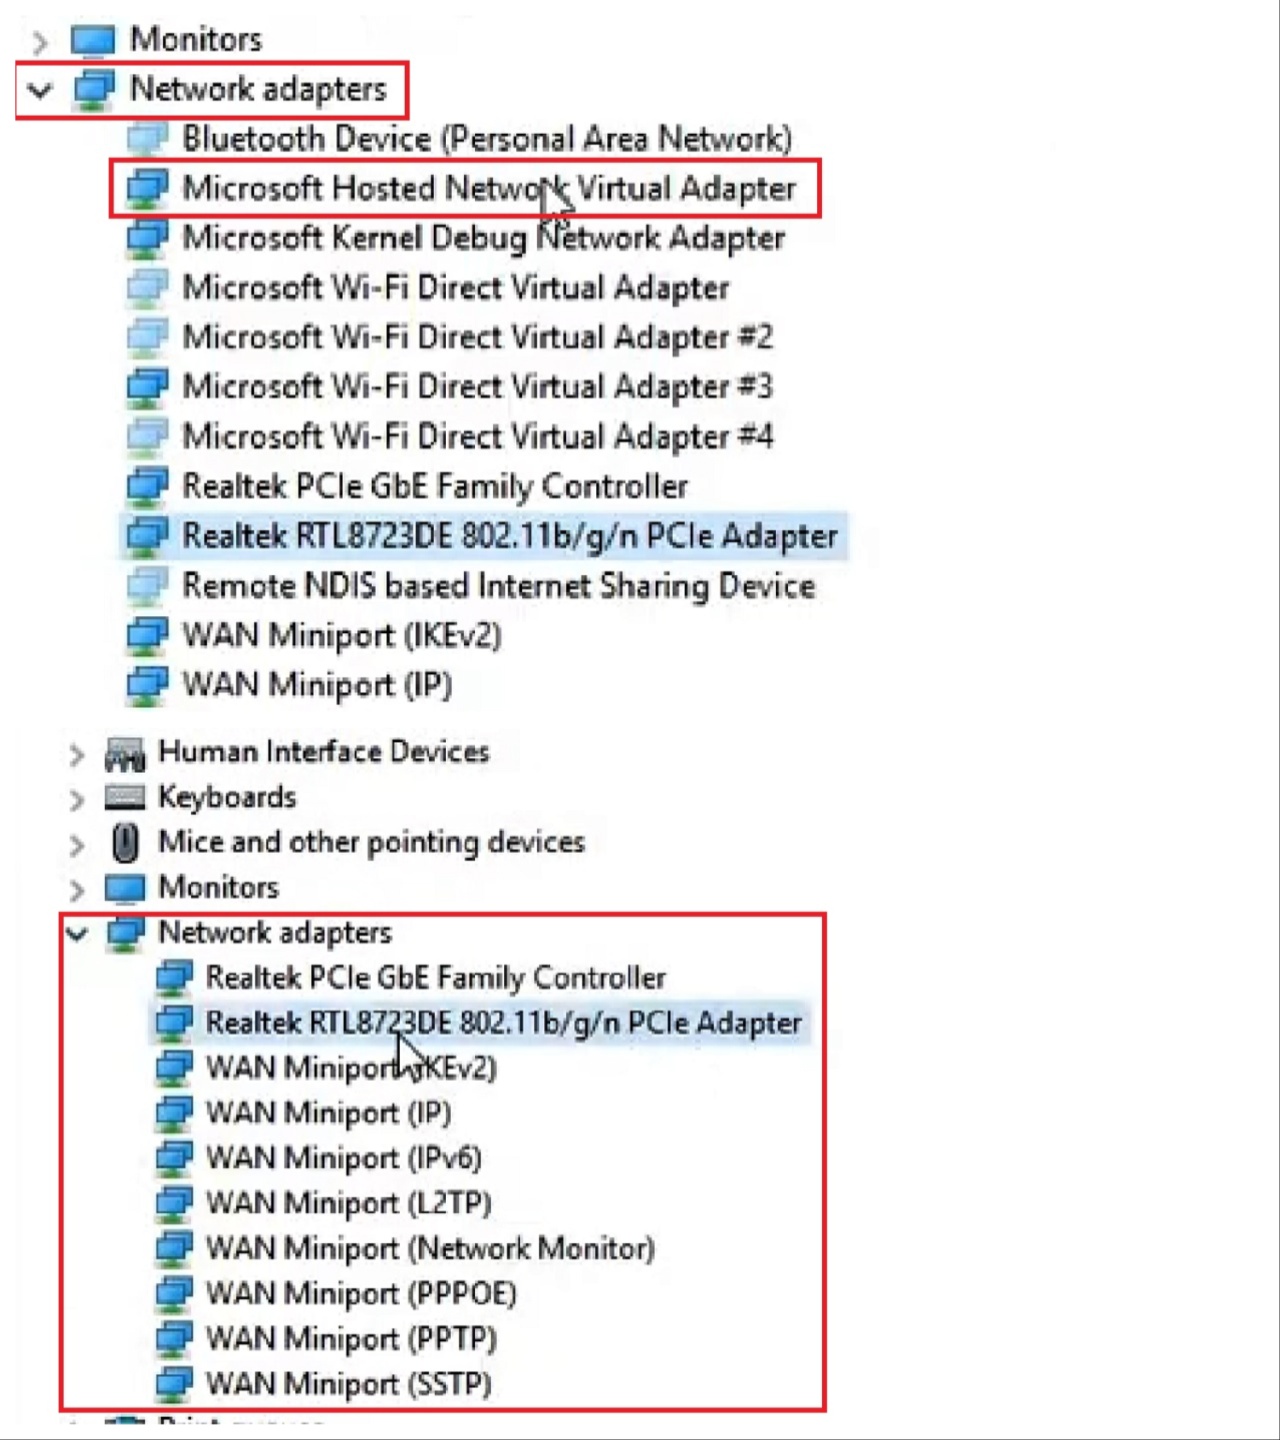 Microsoft Hosted Network Virtual Adapter in the Device Manager